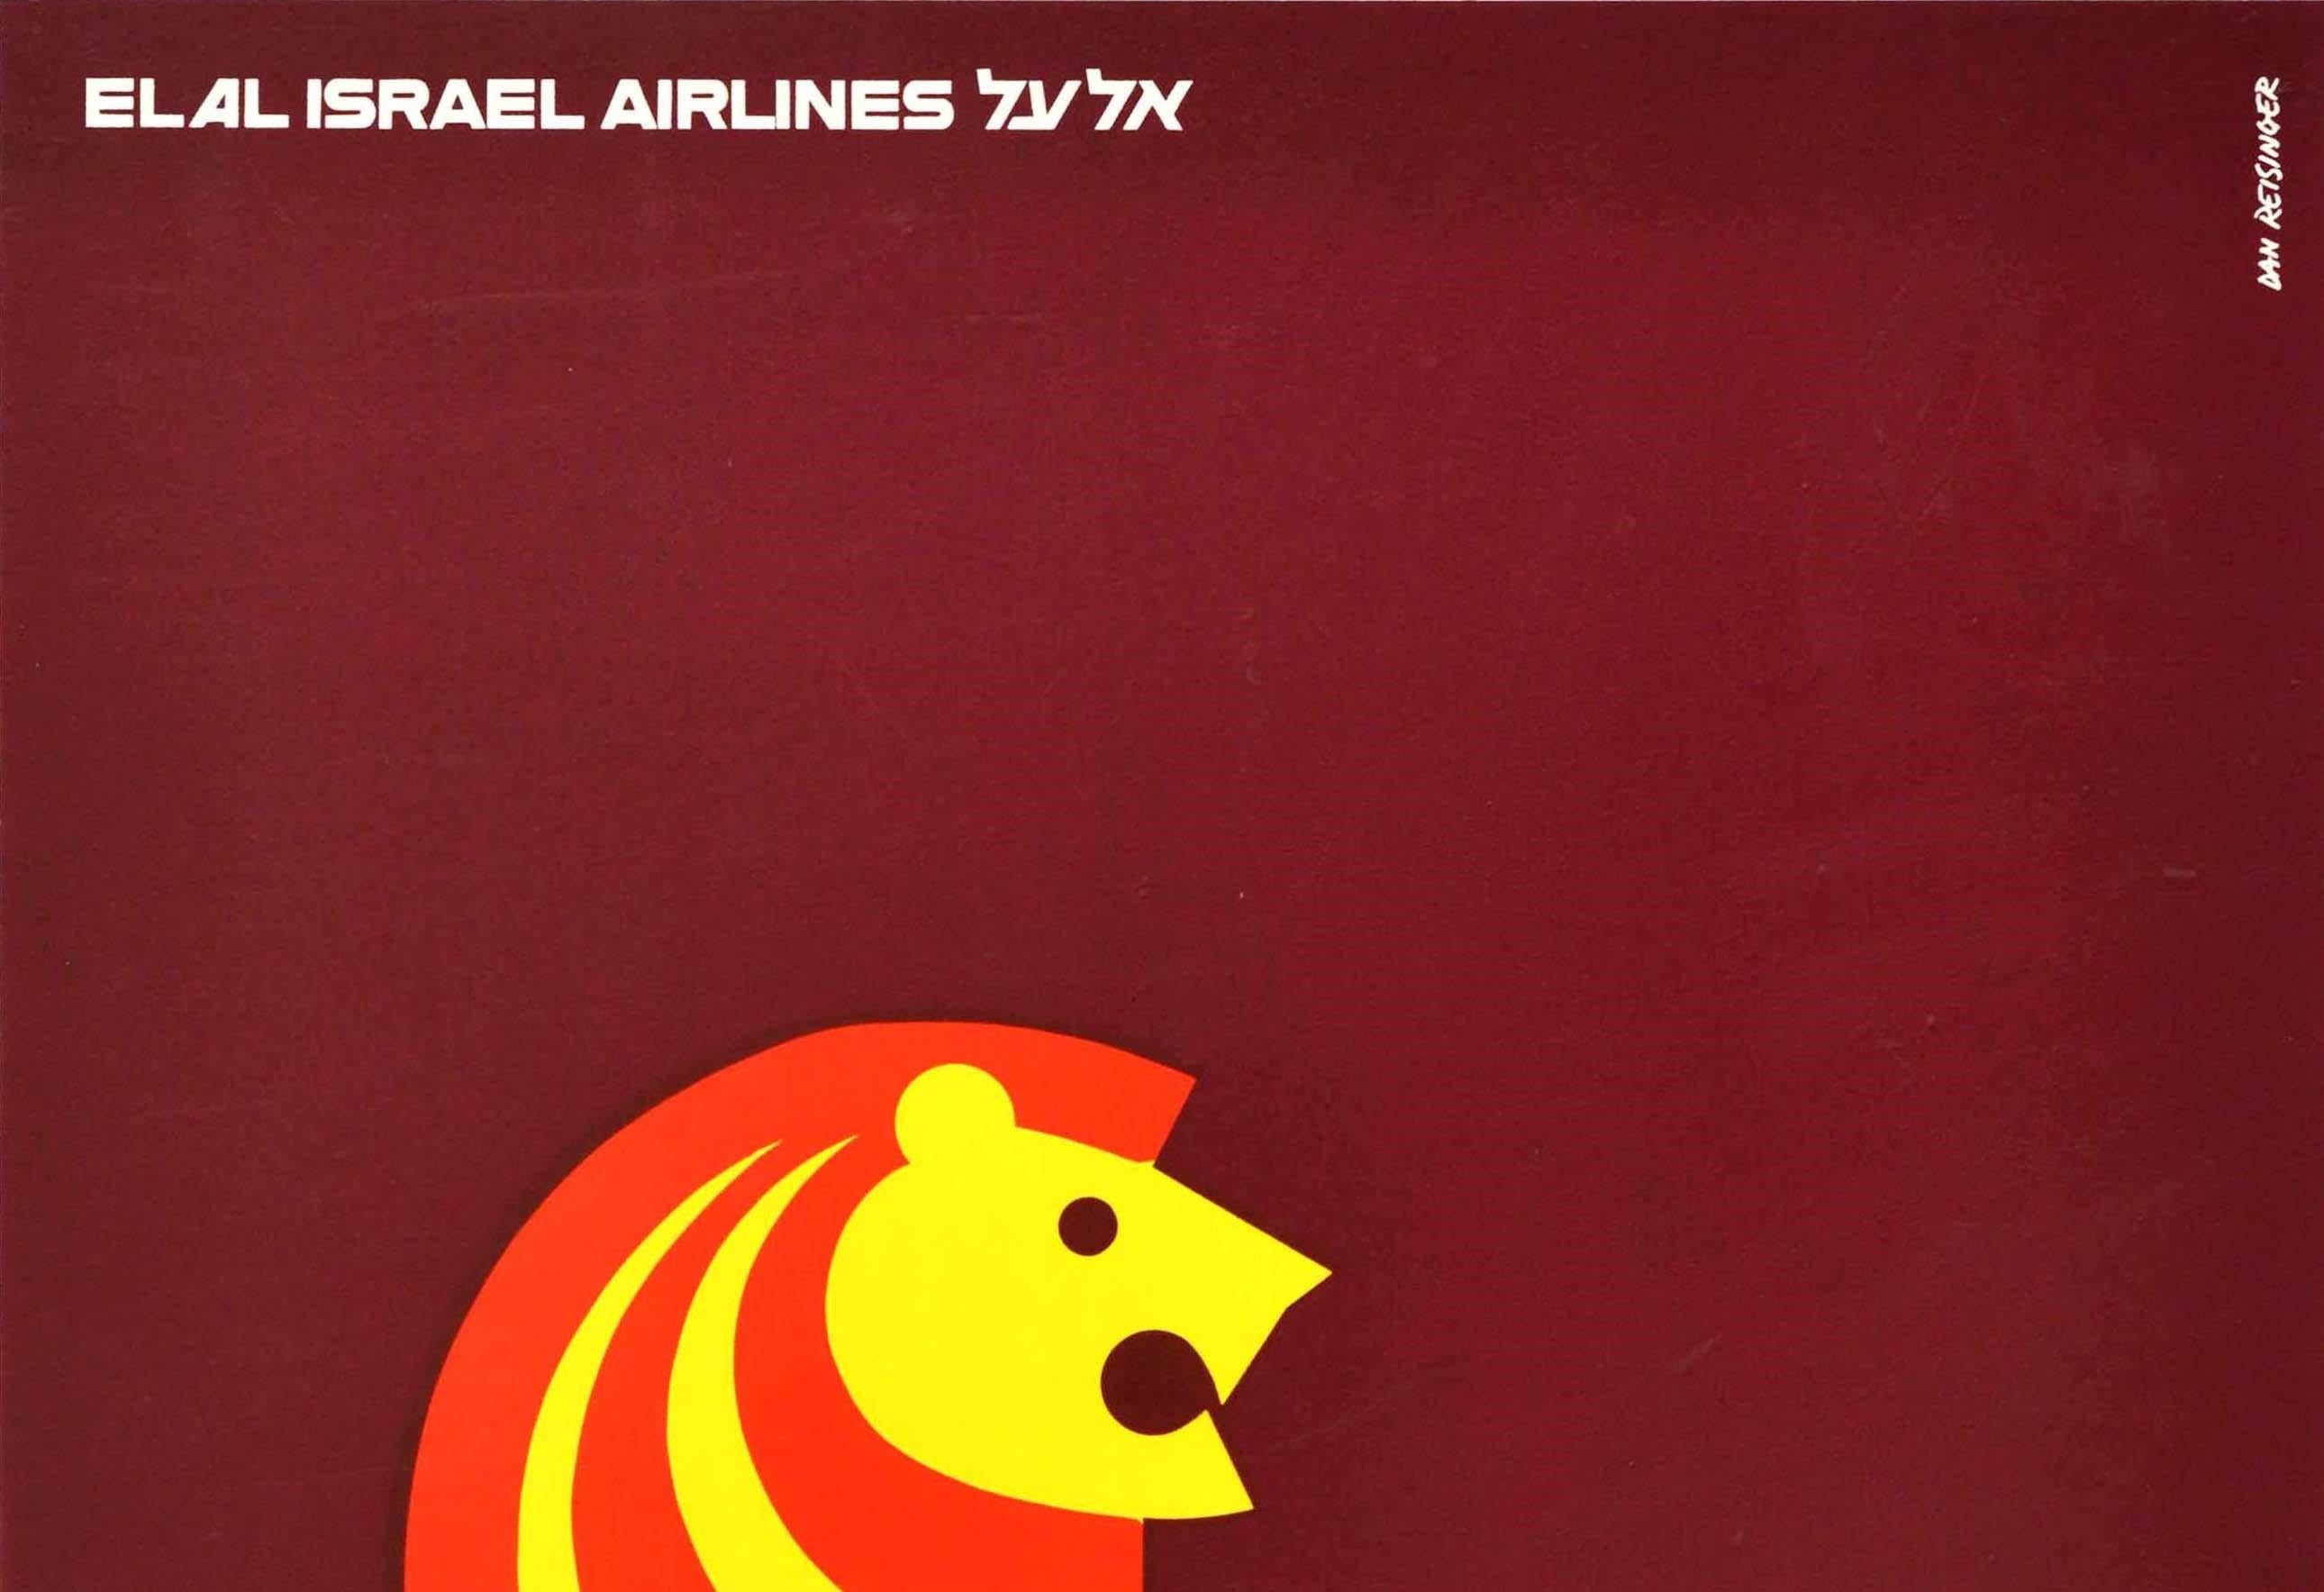 Original vintage travel poster issued by El Al Israel Airlines for Jerusalem featuring a great graphic design by the notable Israeli artist Dan Reisinger (1934-2019) depicting the bold white lettering of El Al with a lion - representing the Lion of